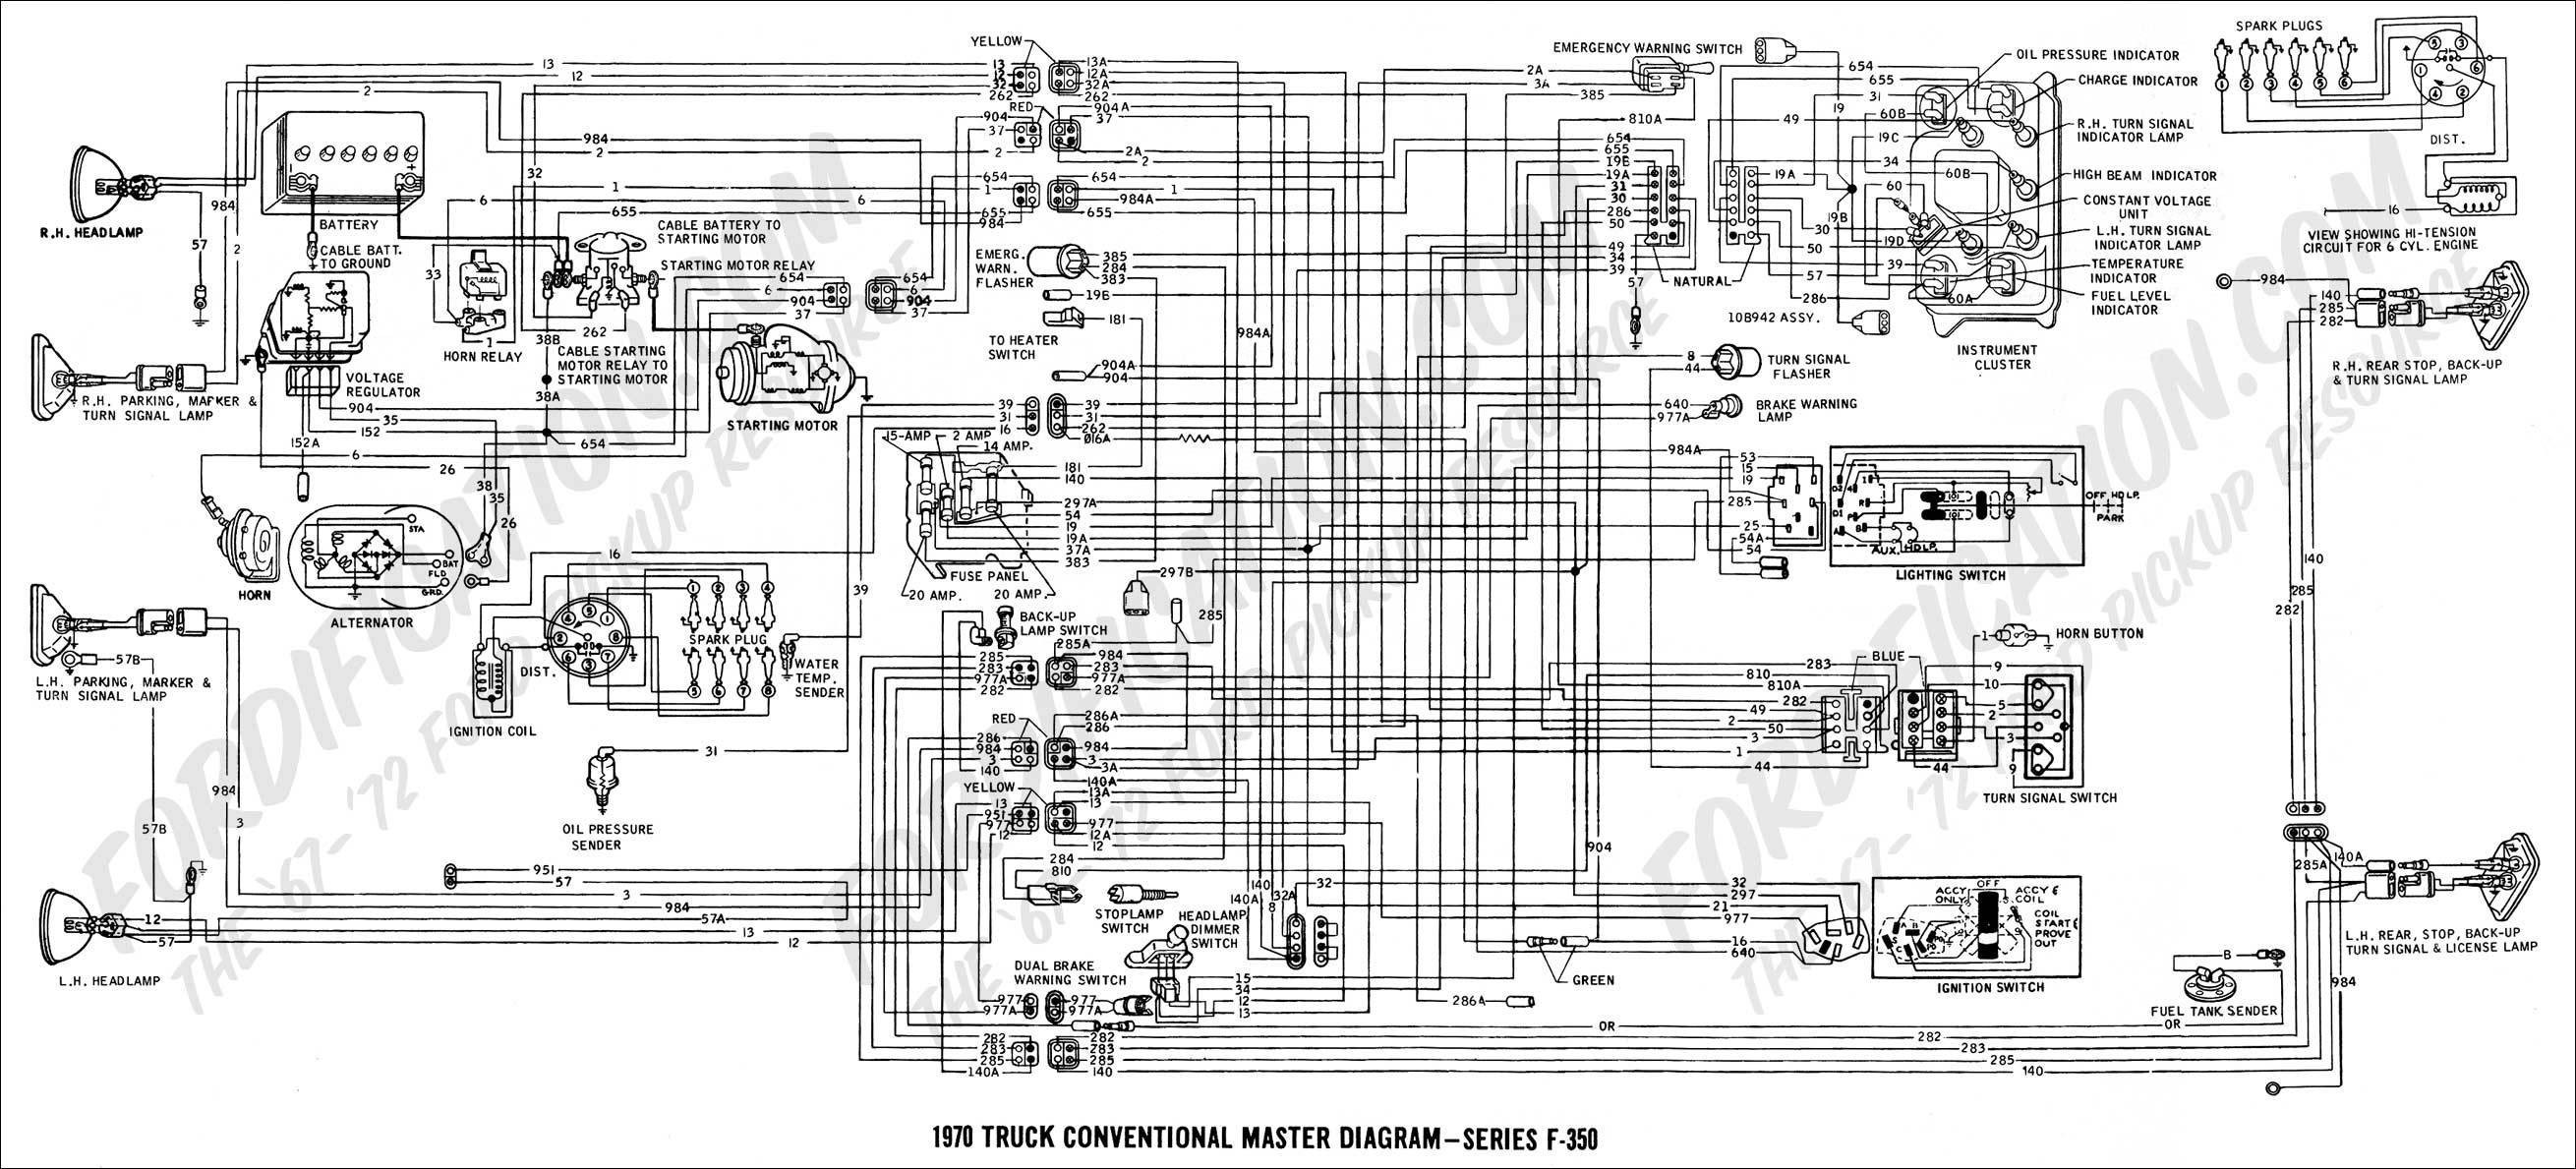 1994 Ford F 350 Wiring Diagram Tail Lights Also Wiring Diagram User Ford F350 Wiring Diagram For Trailer Plug Ford F350 Wiring Diagrams